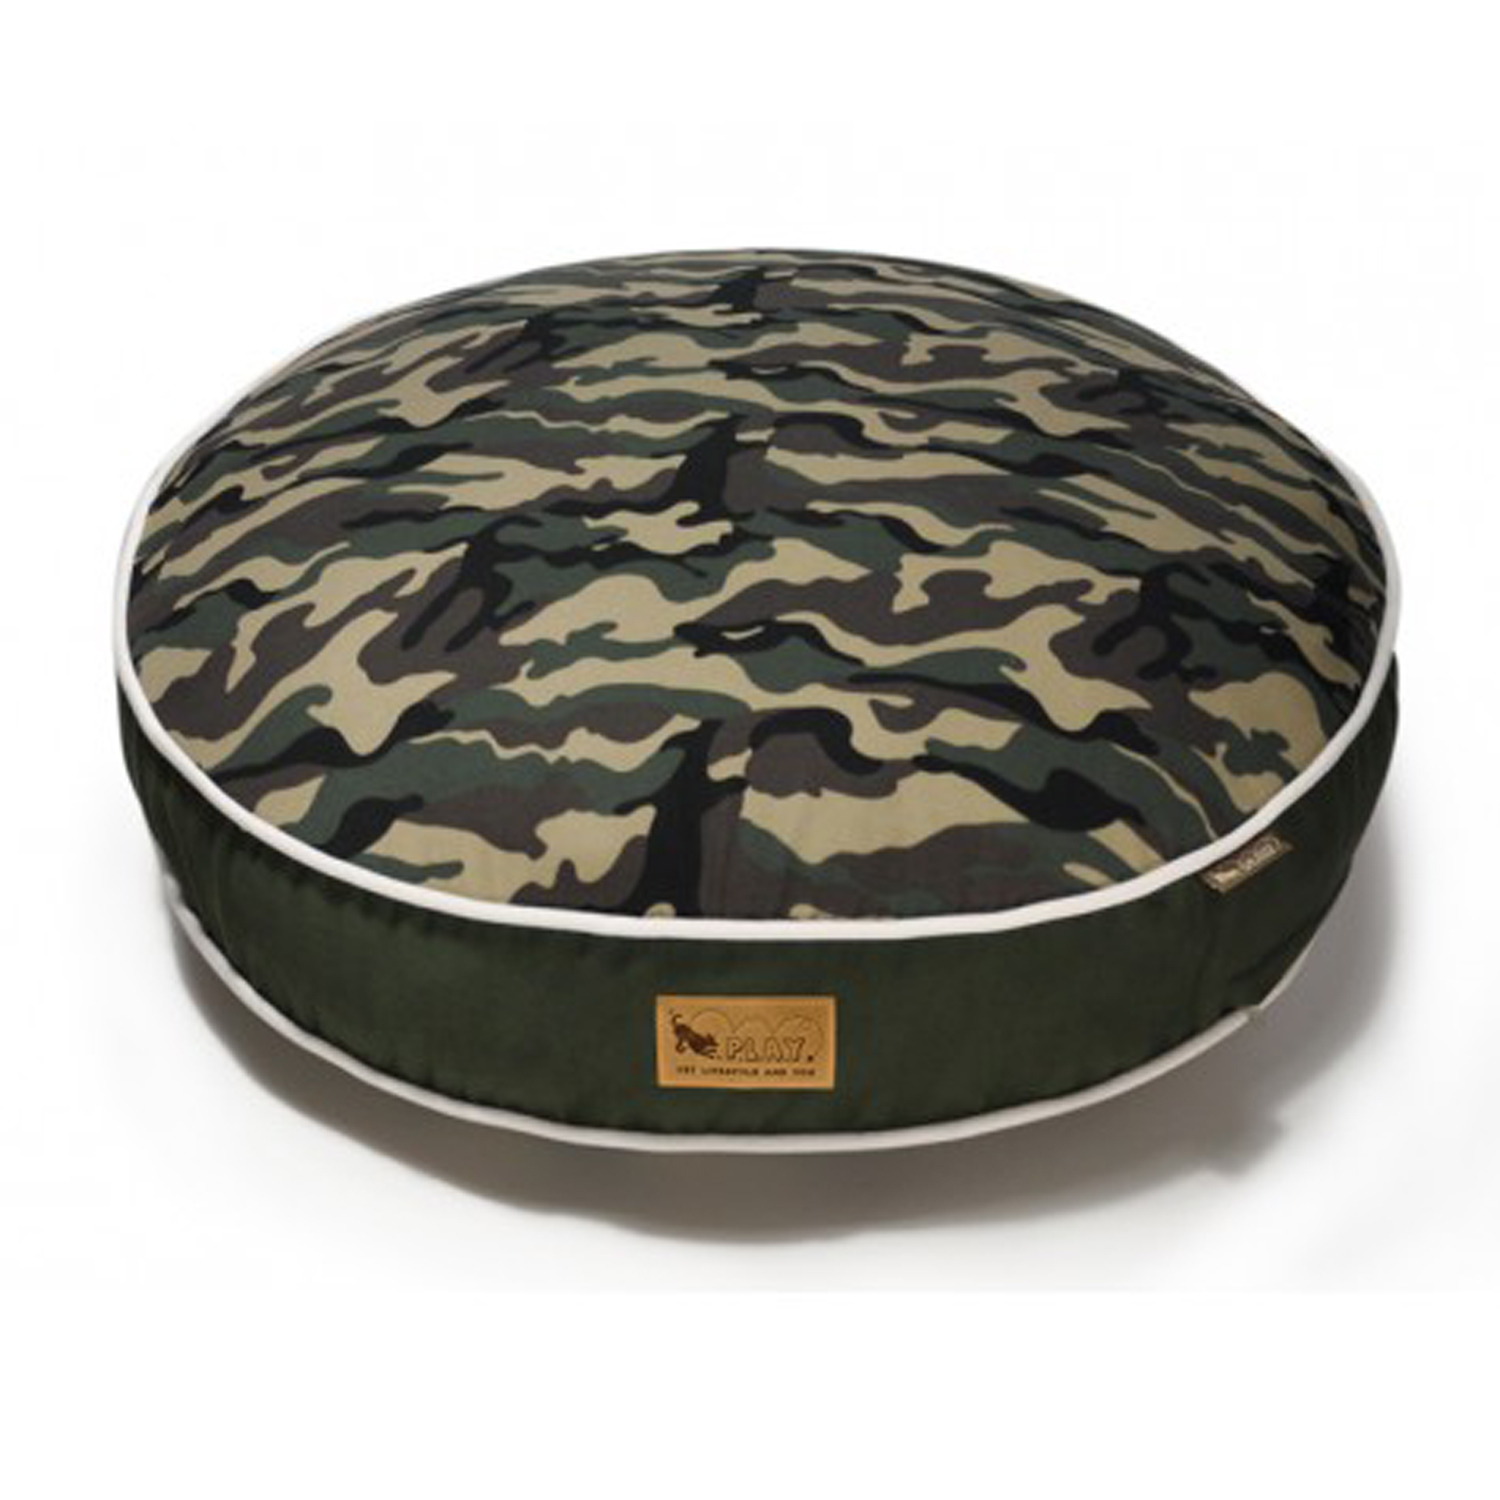 P.L.A.Y. Camouflage Round Dog Bed - Green